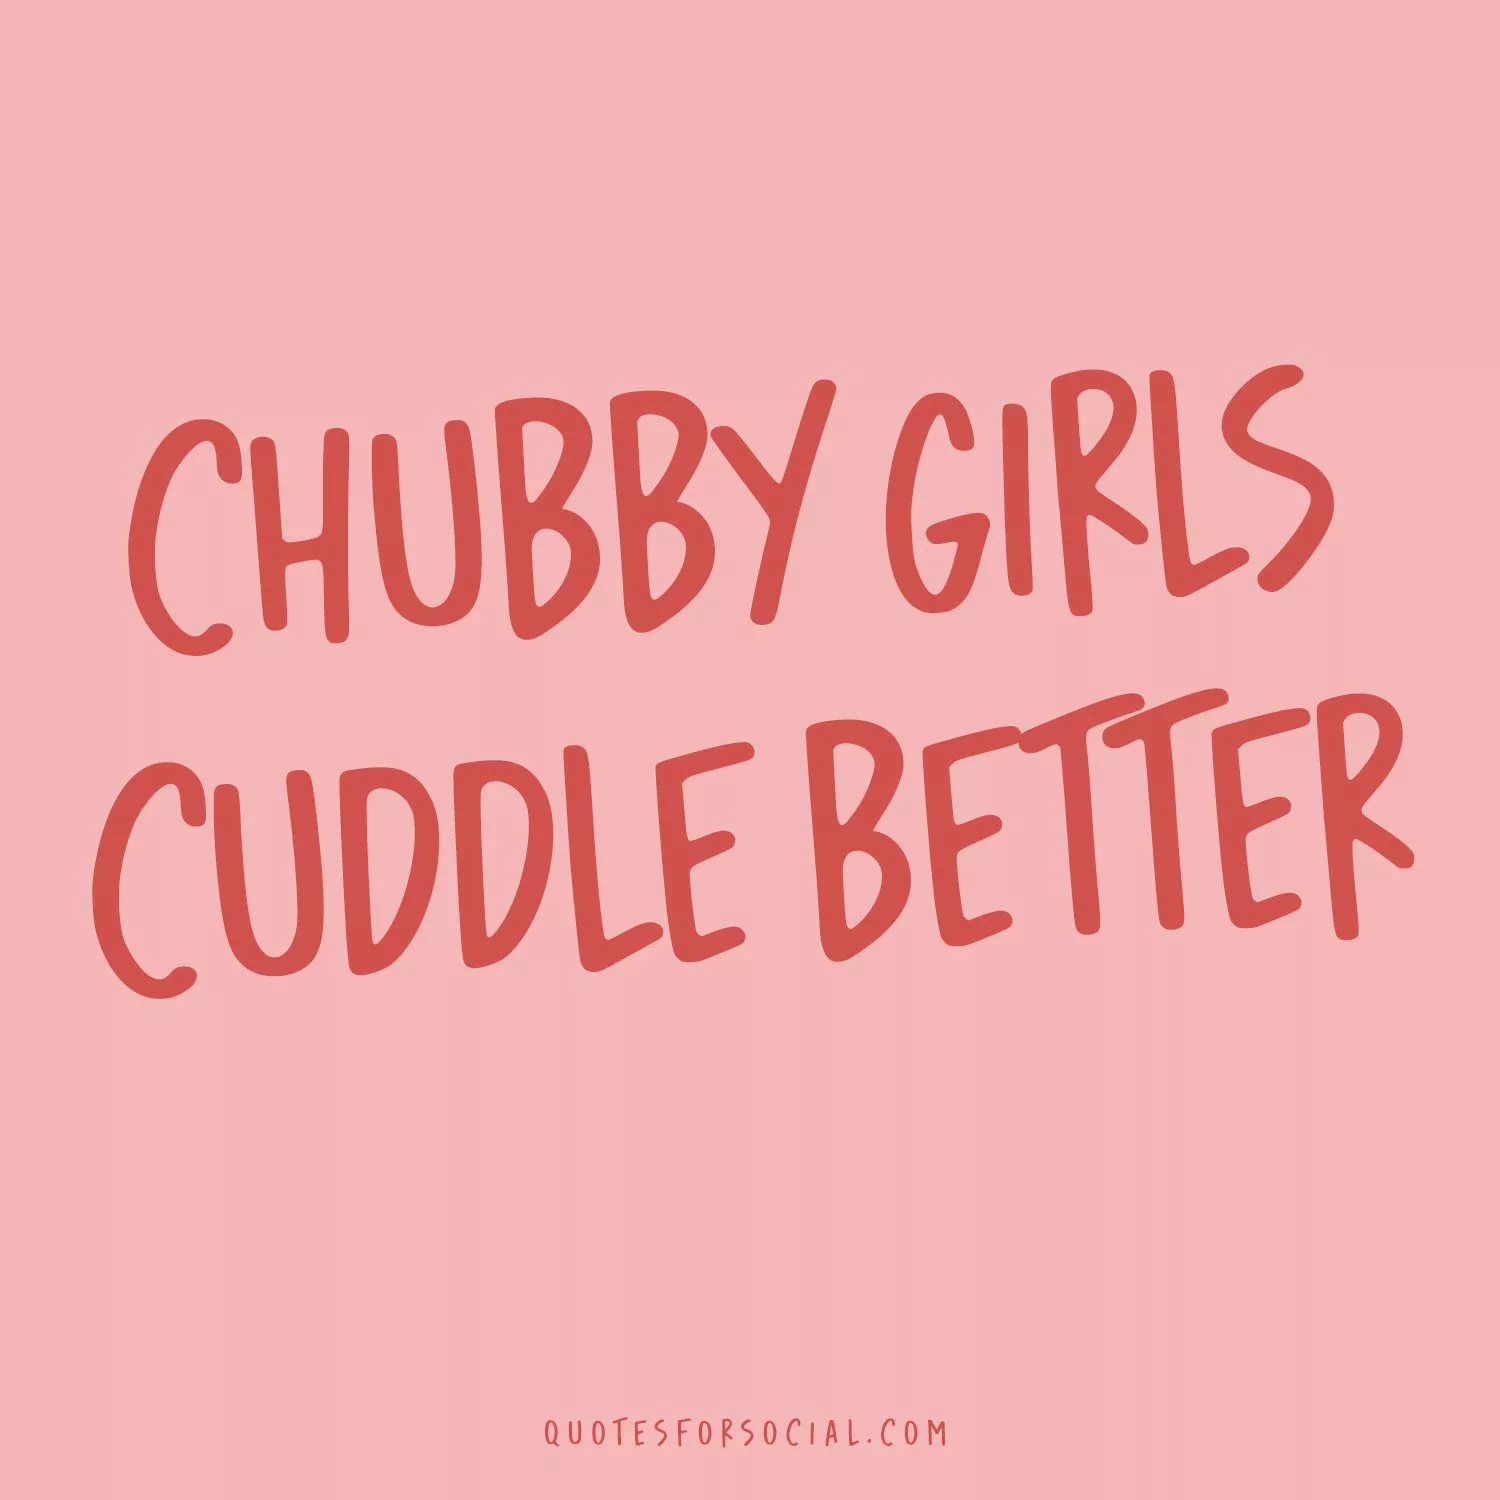 Fat girl quotes for Instagram